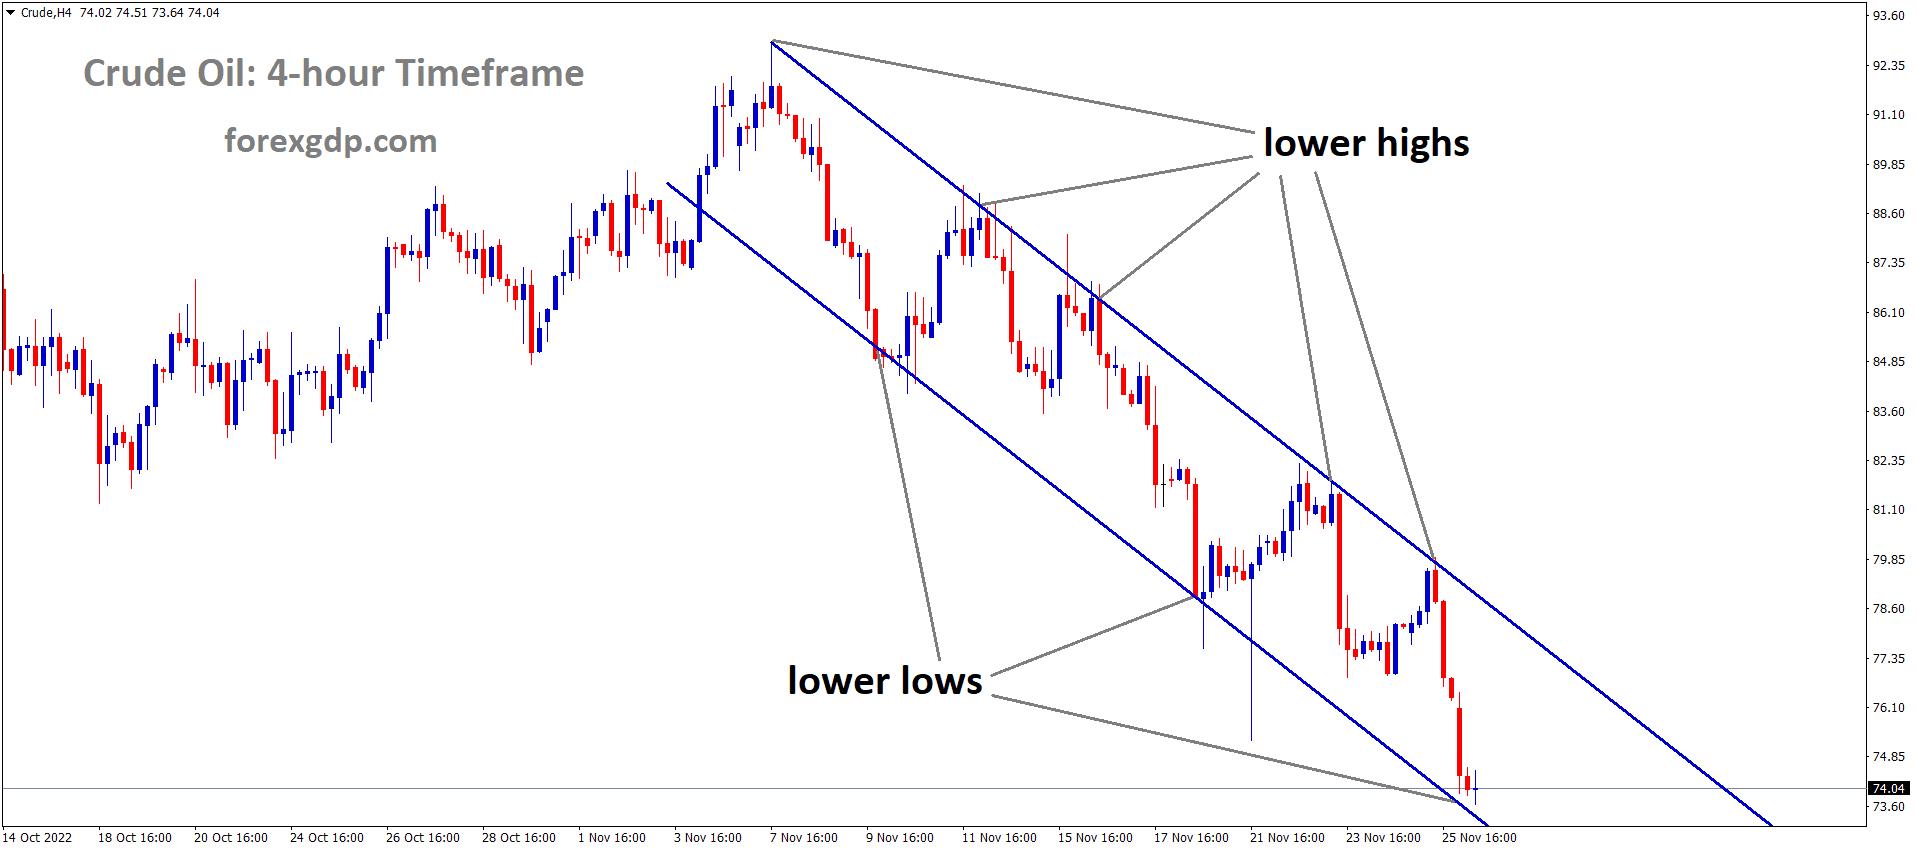 Crude Oil is moving in the Descending channel and the market has reached the lower low area of the channel